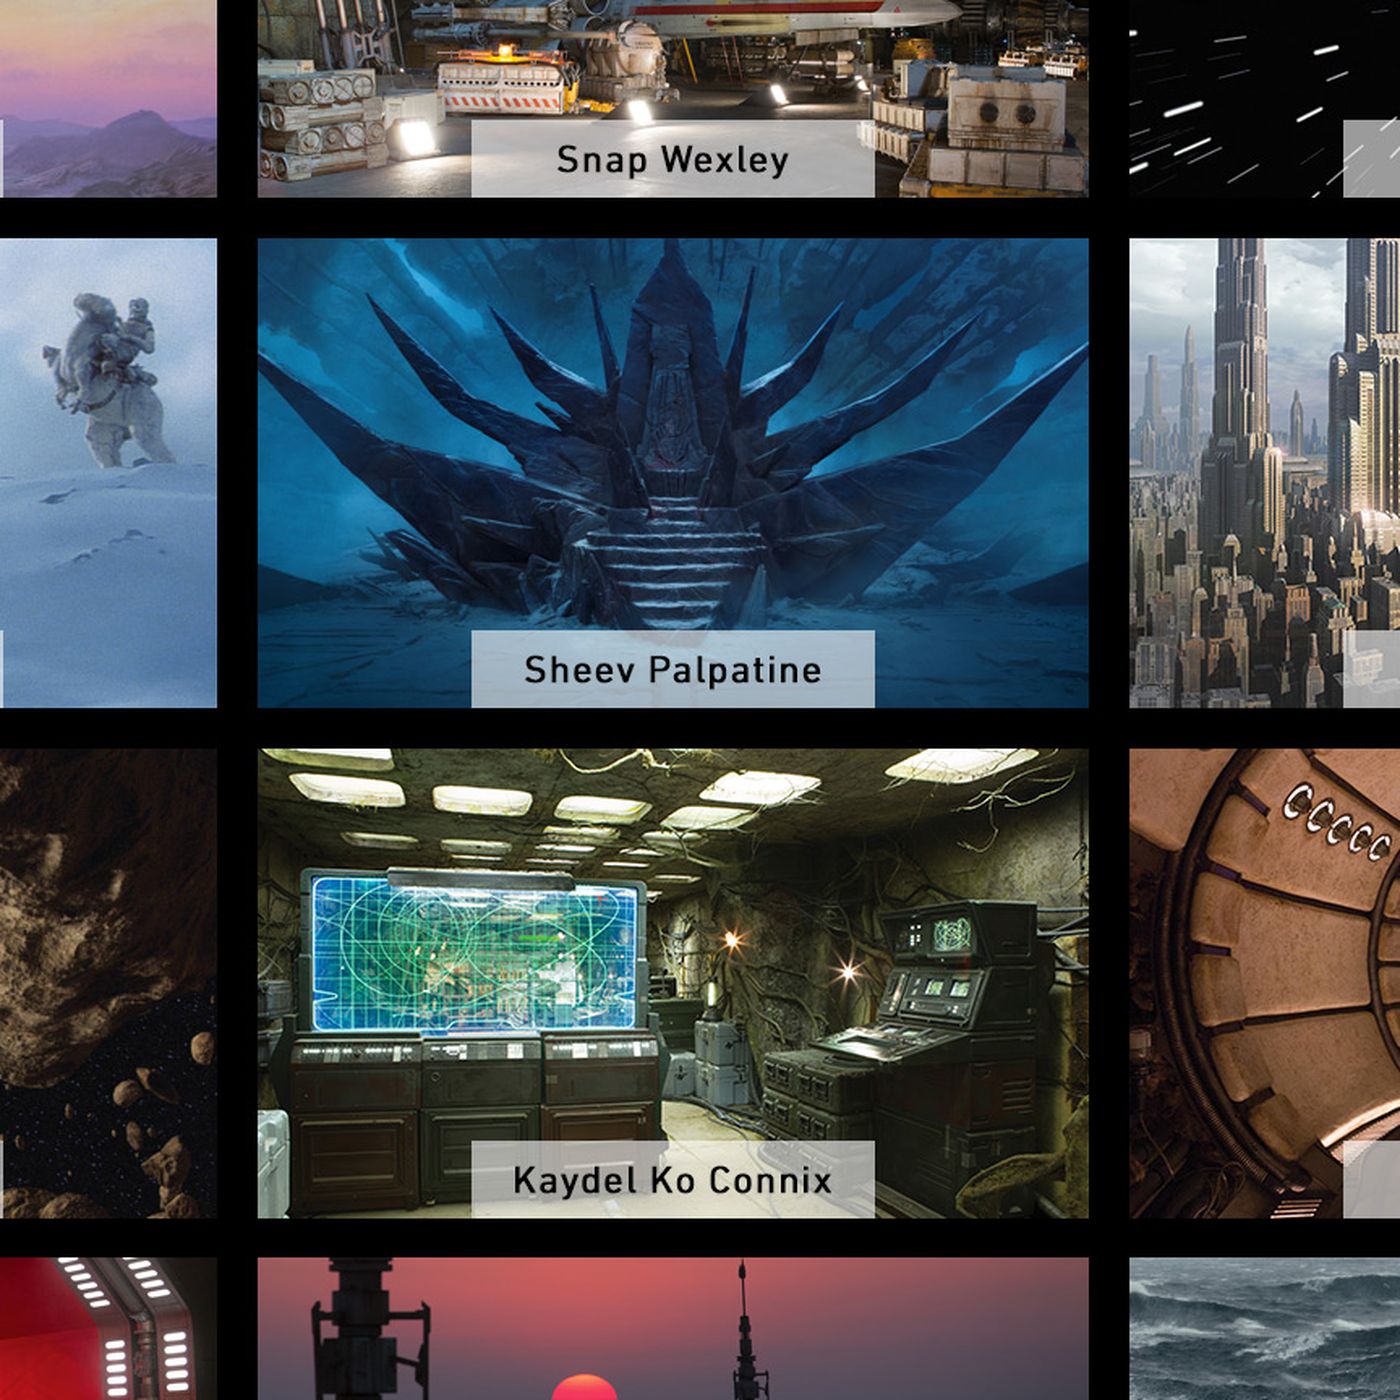 Host Your Next Zoom Call From The Death Star With These Fun Star Wars Backgrounds The Verge